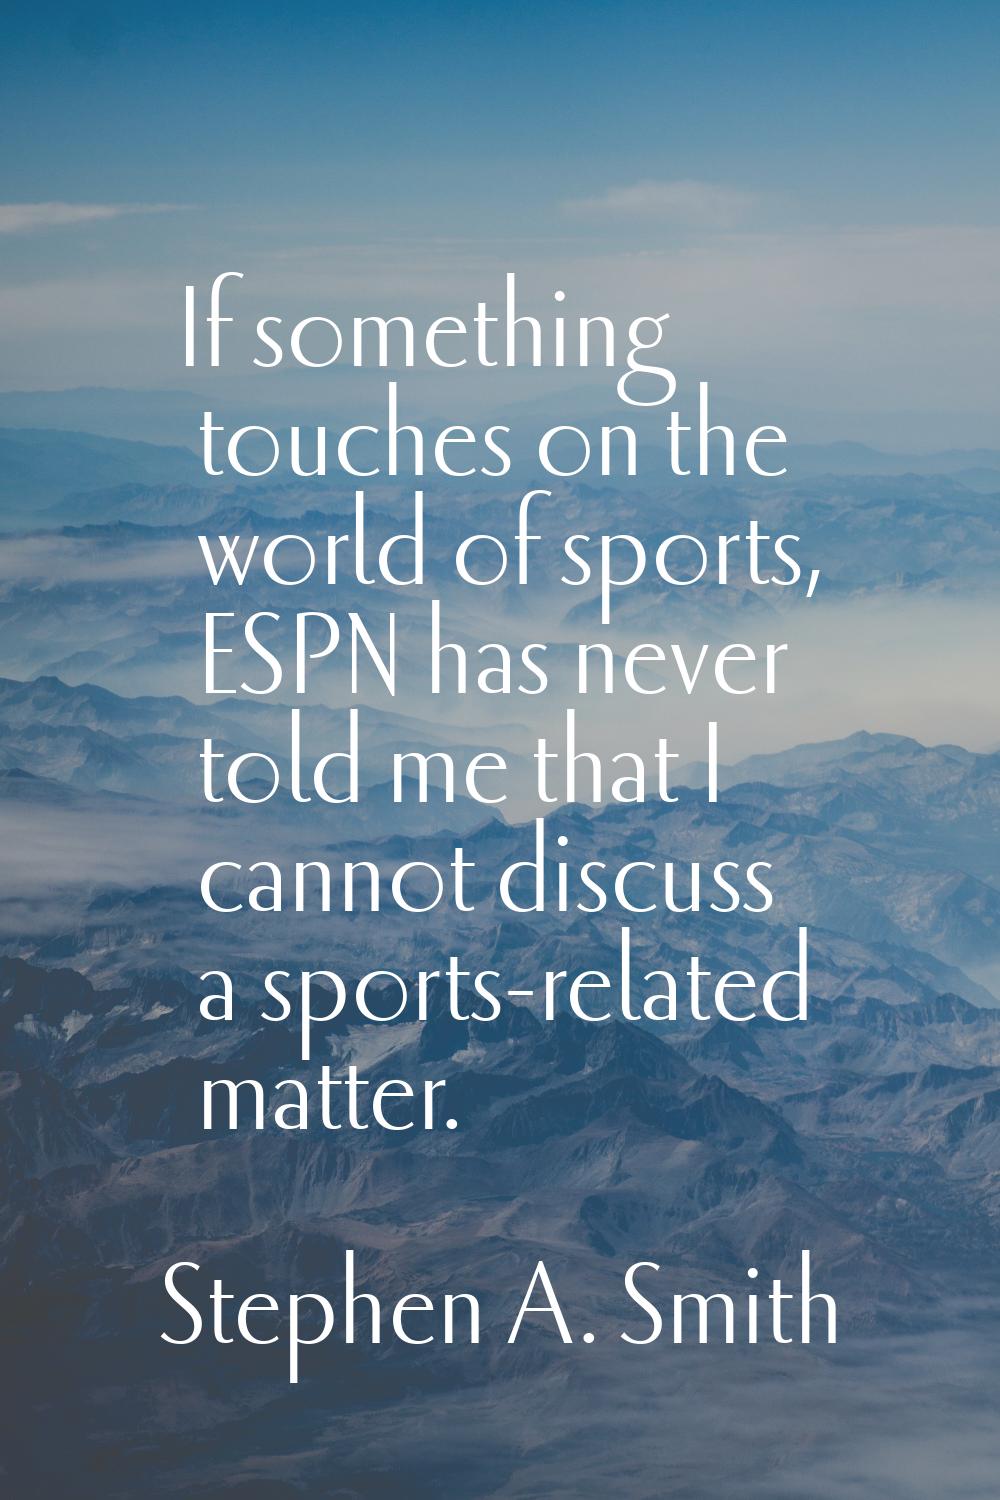 If something touches on the world of sports, ESPN has never told me that I cannot discuss a sports-